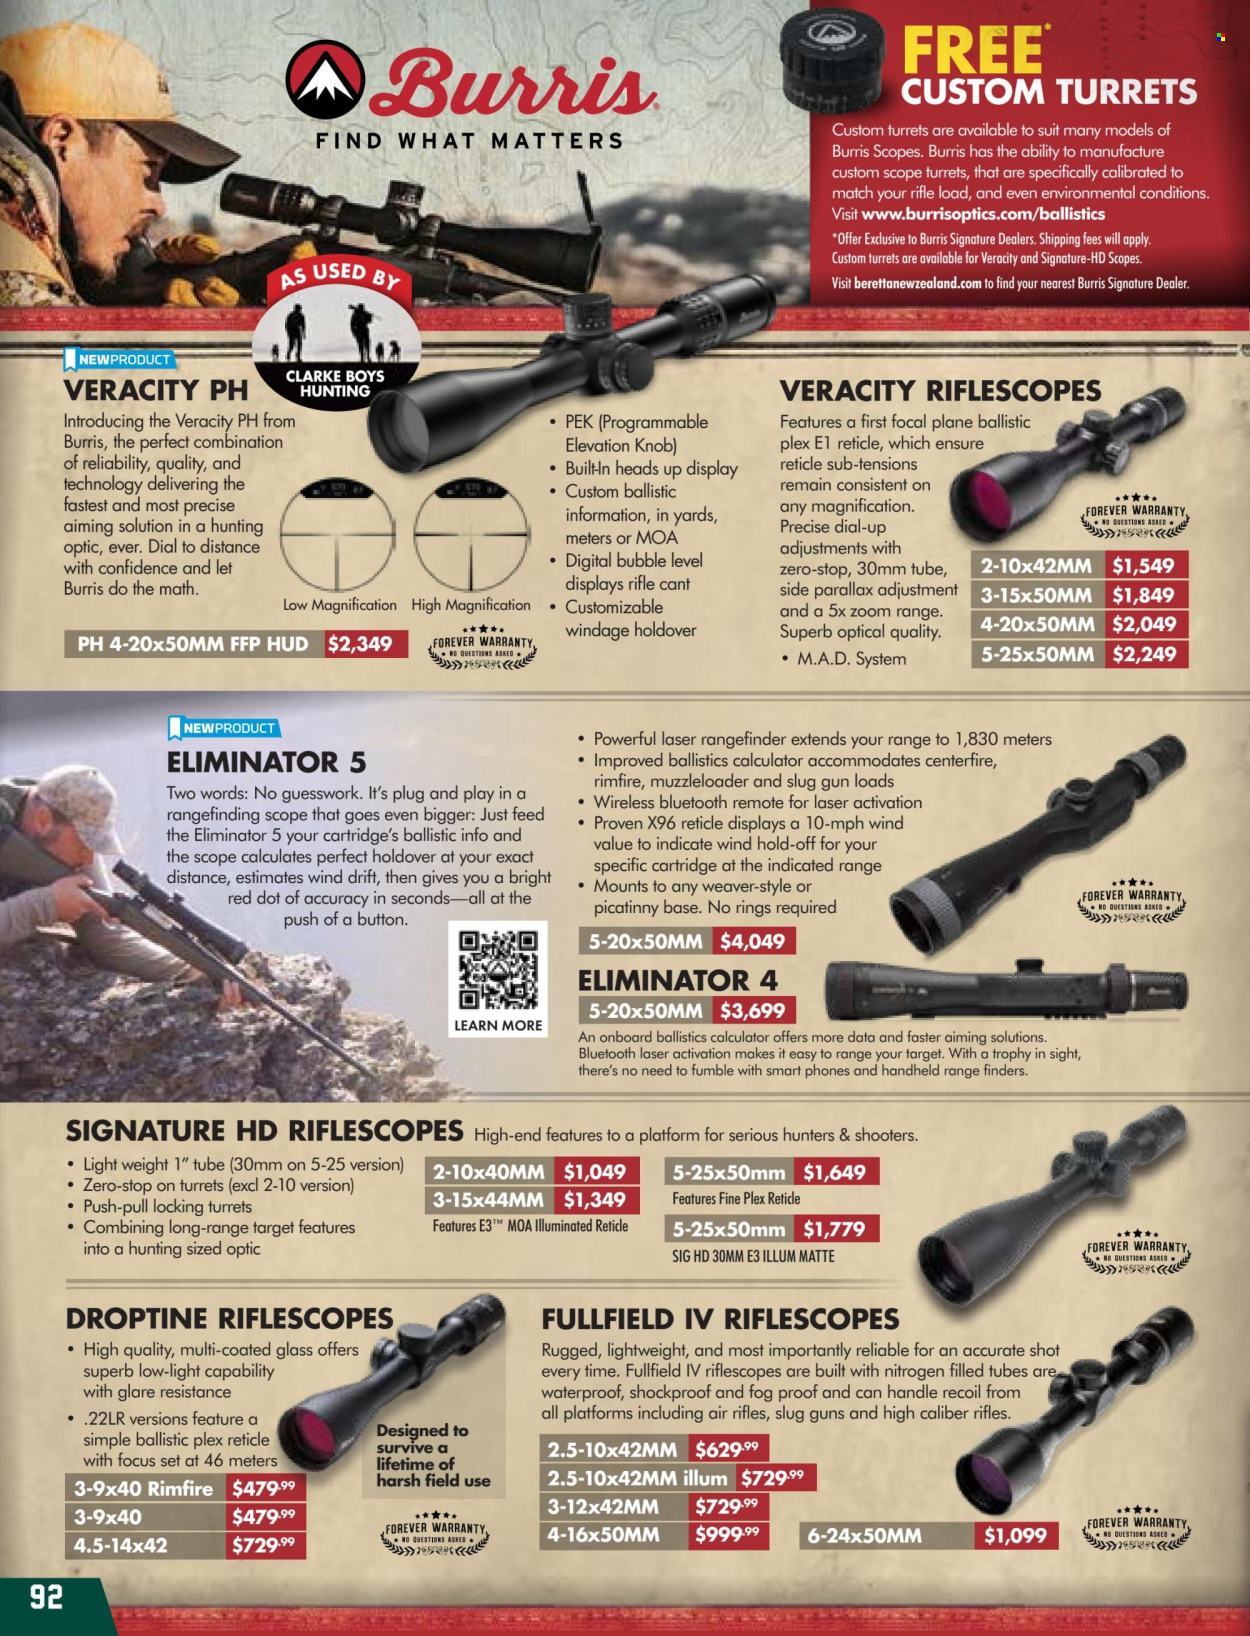 thumbnail - Hunting & Fishing mailer - Sales products - rangefinder, rifle, scope. Page 92.